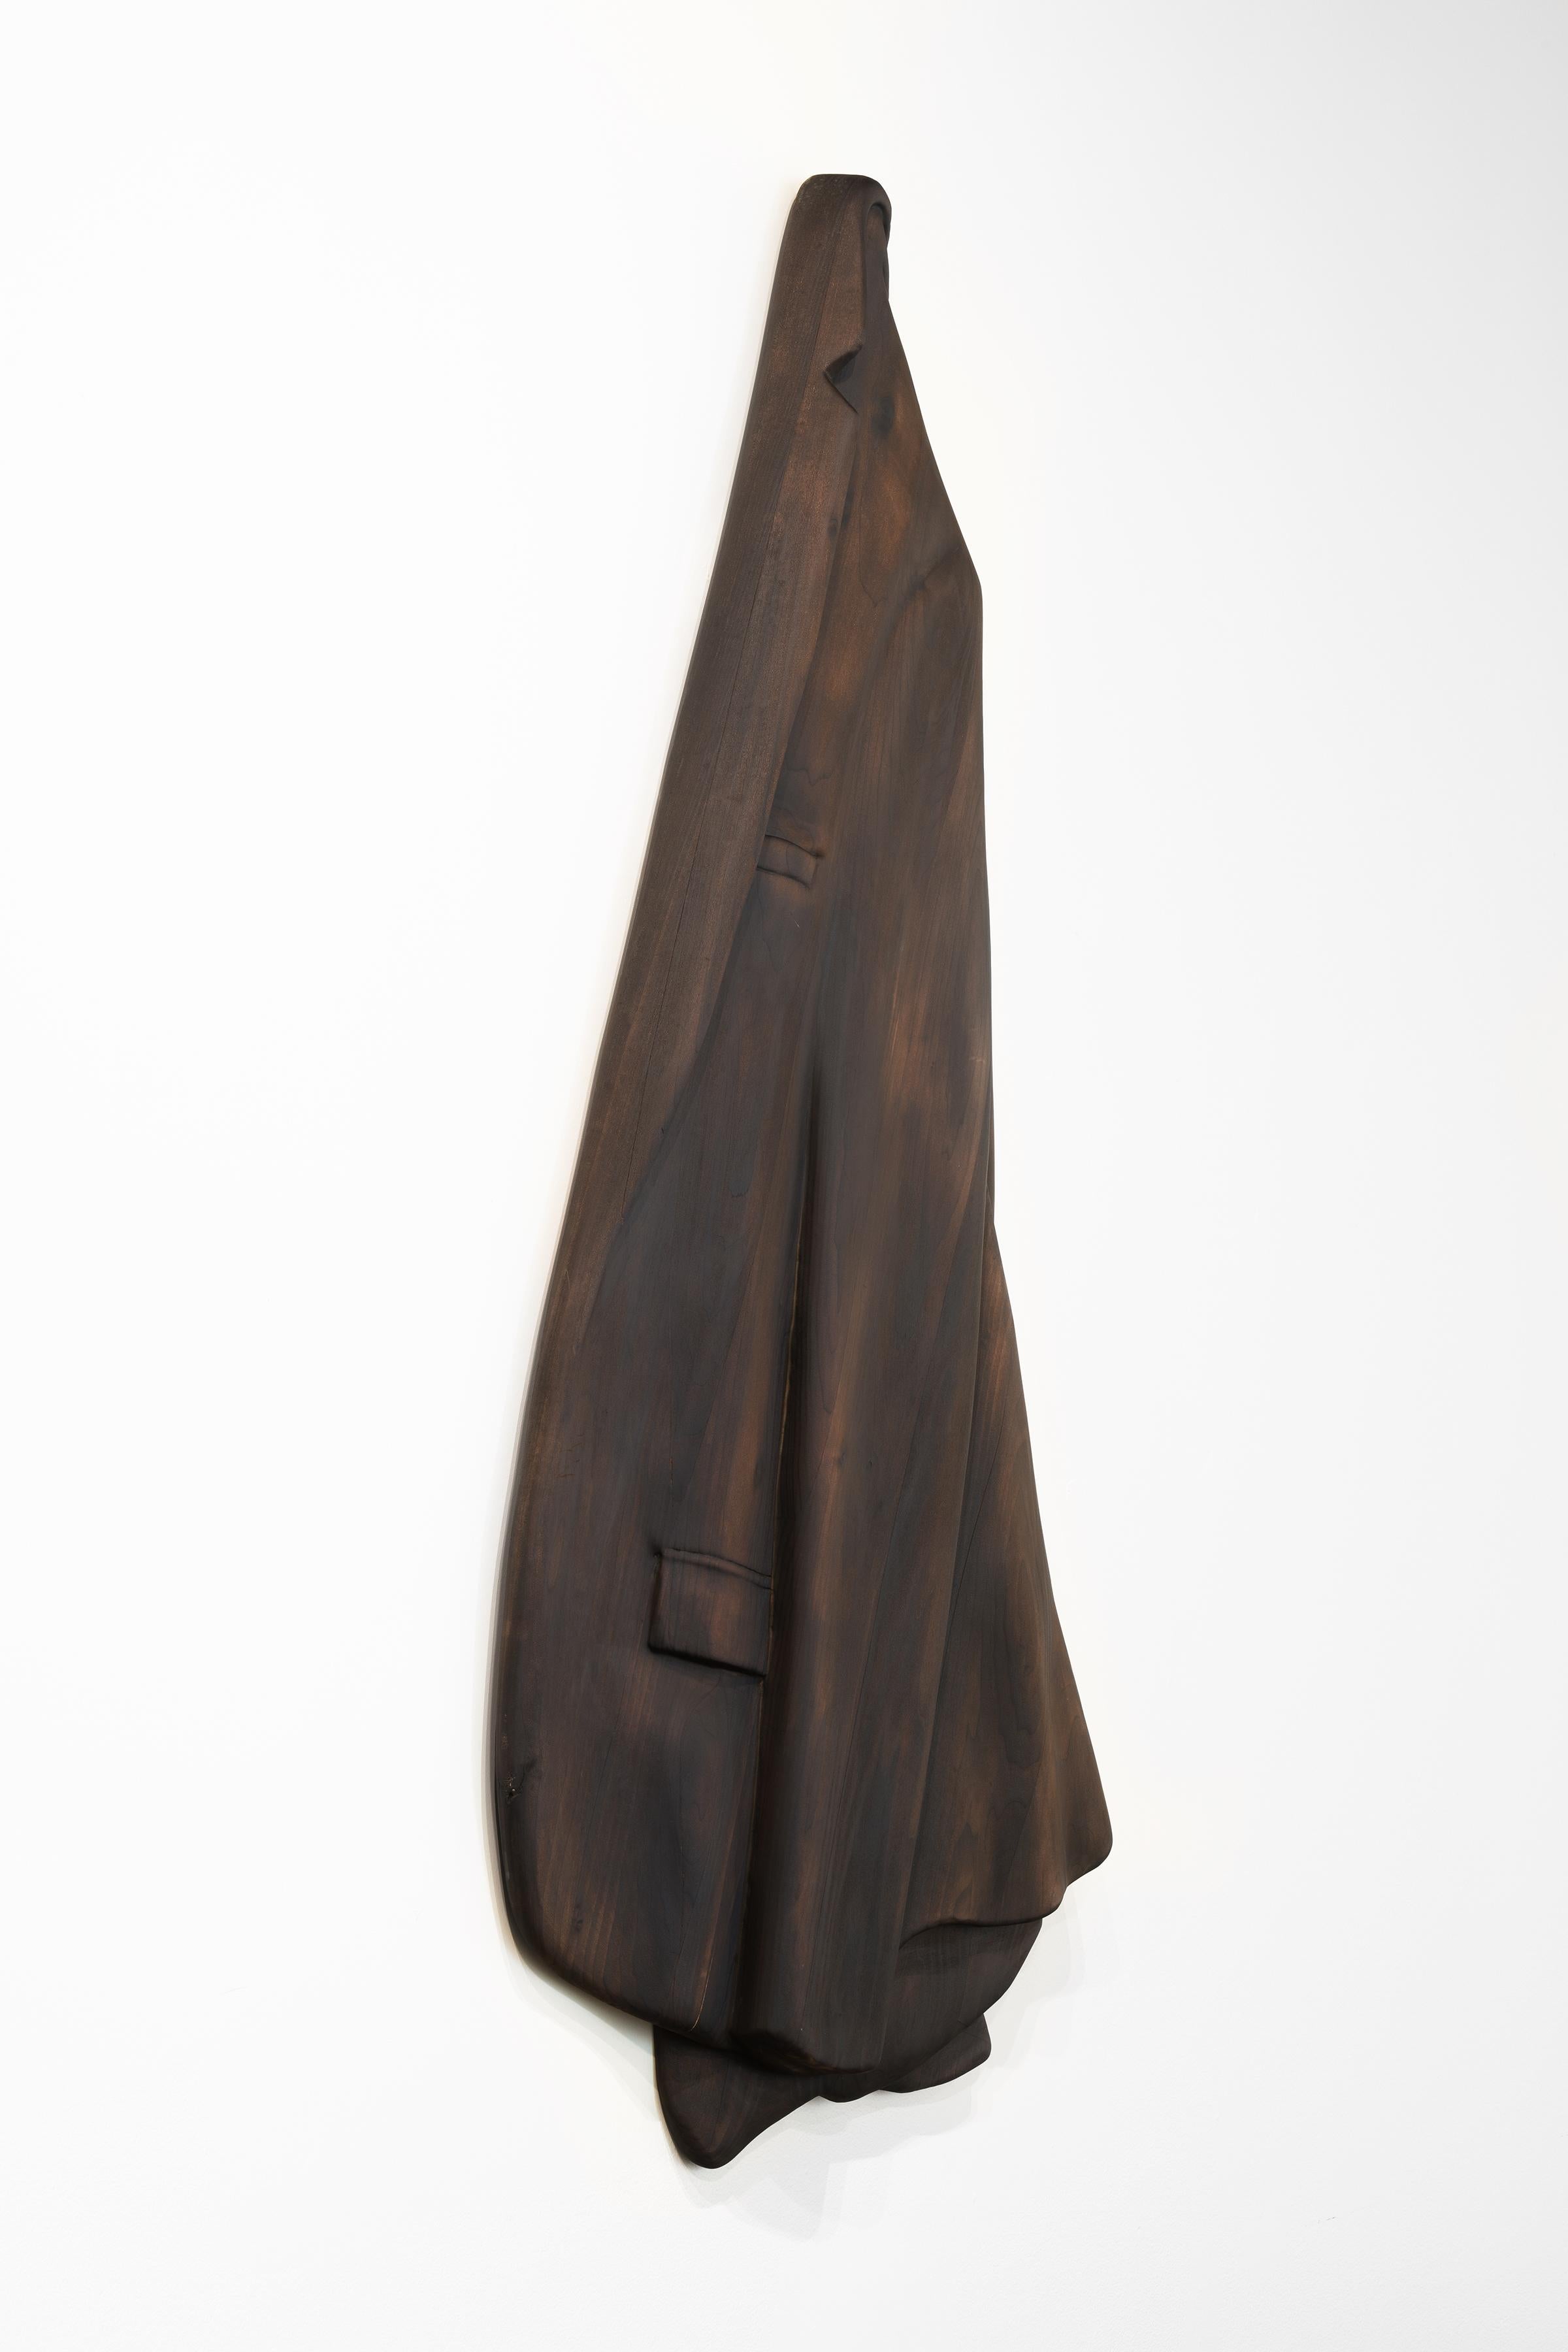 SUIT JACKET - stained wooden hanging sculpture, brown, carved wood - Sculpture by Ray Padron